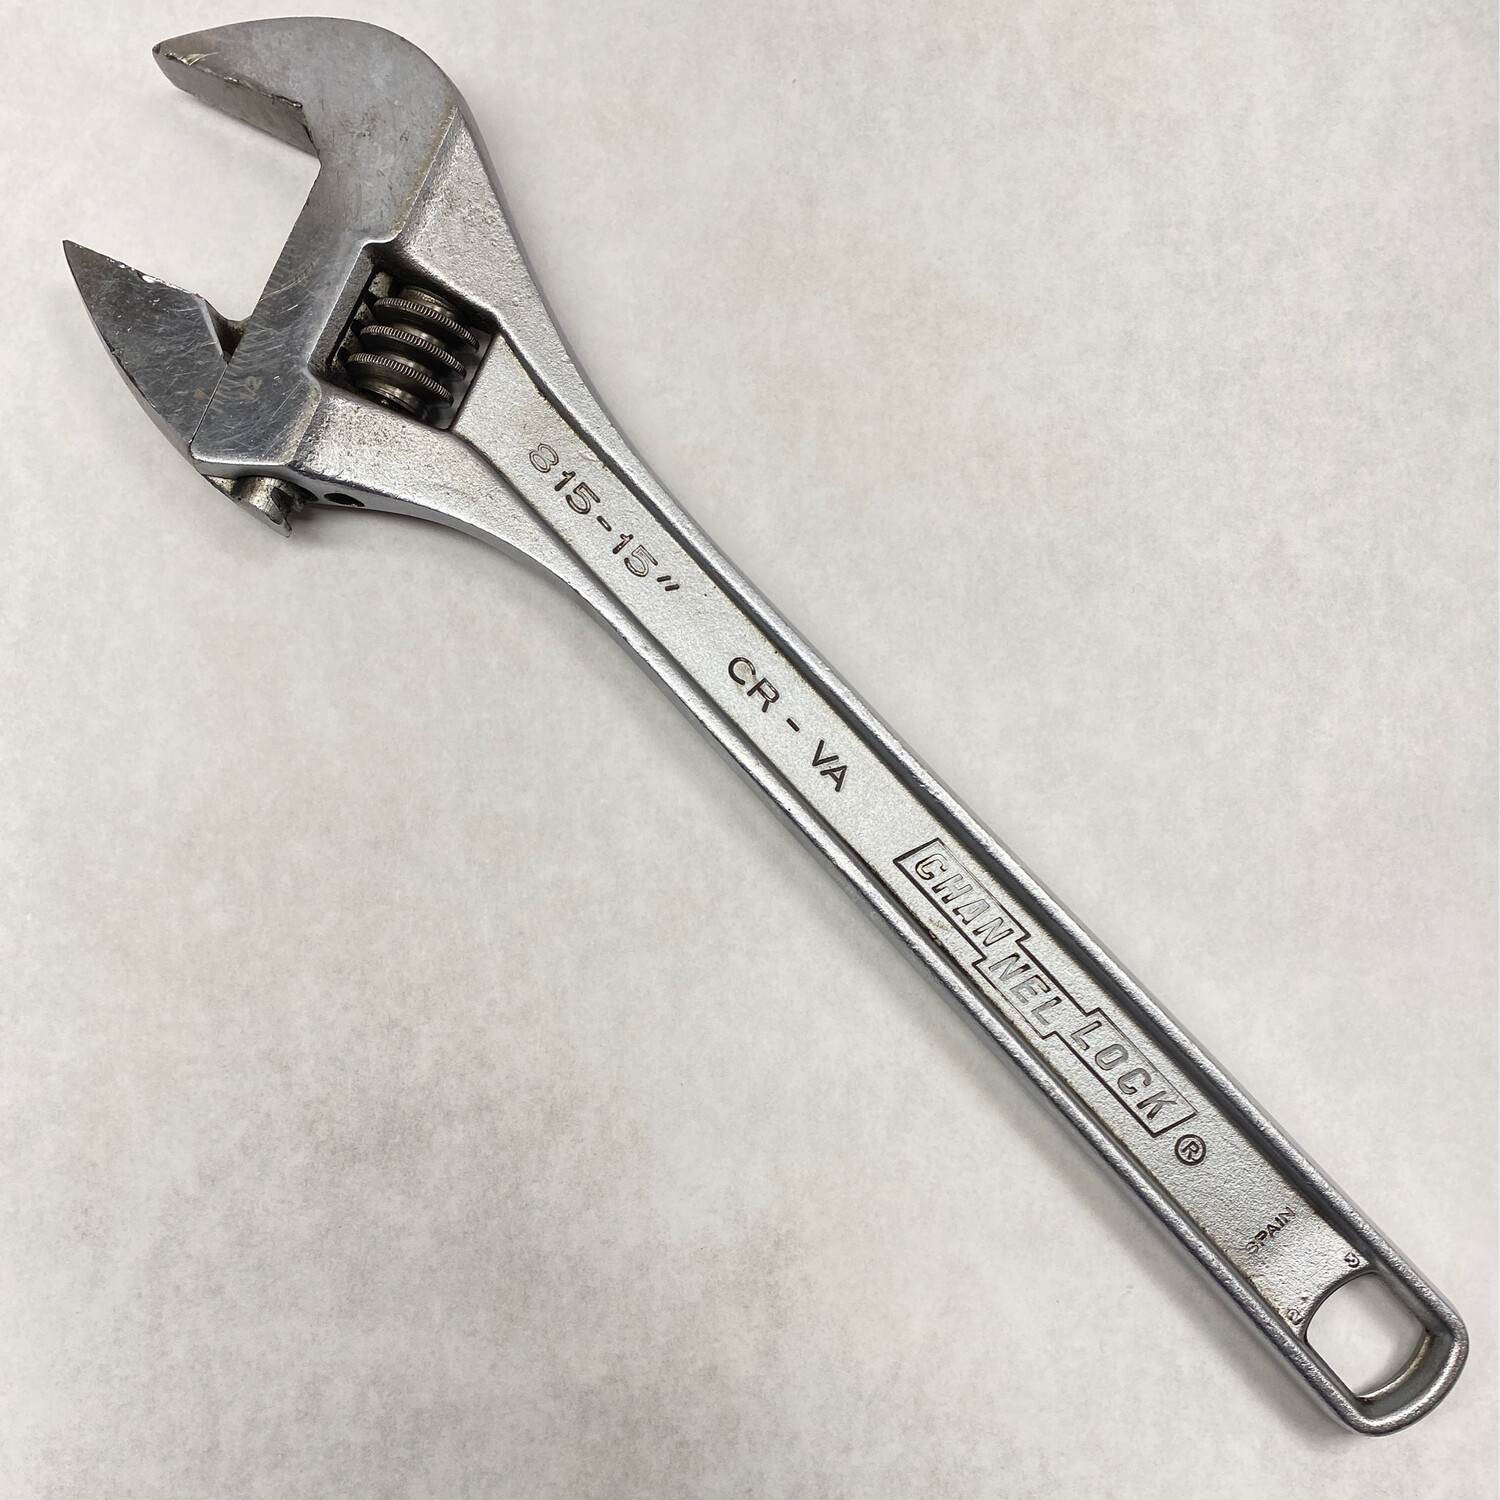 Channel Lock 815-15” Chrome Adjustable Wrench,